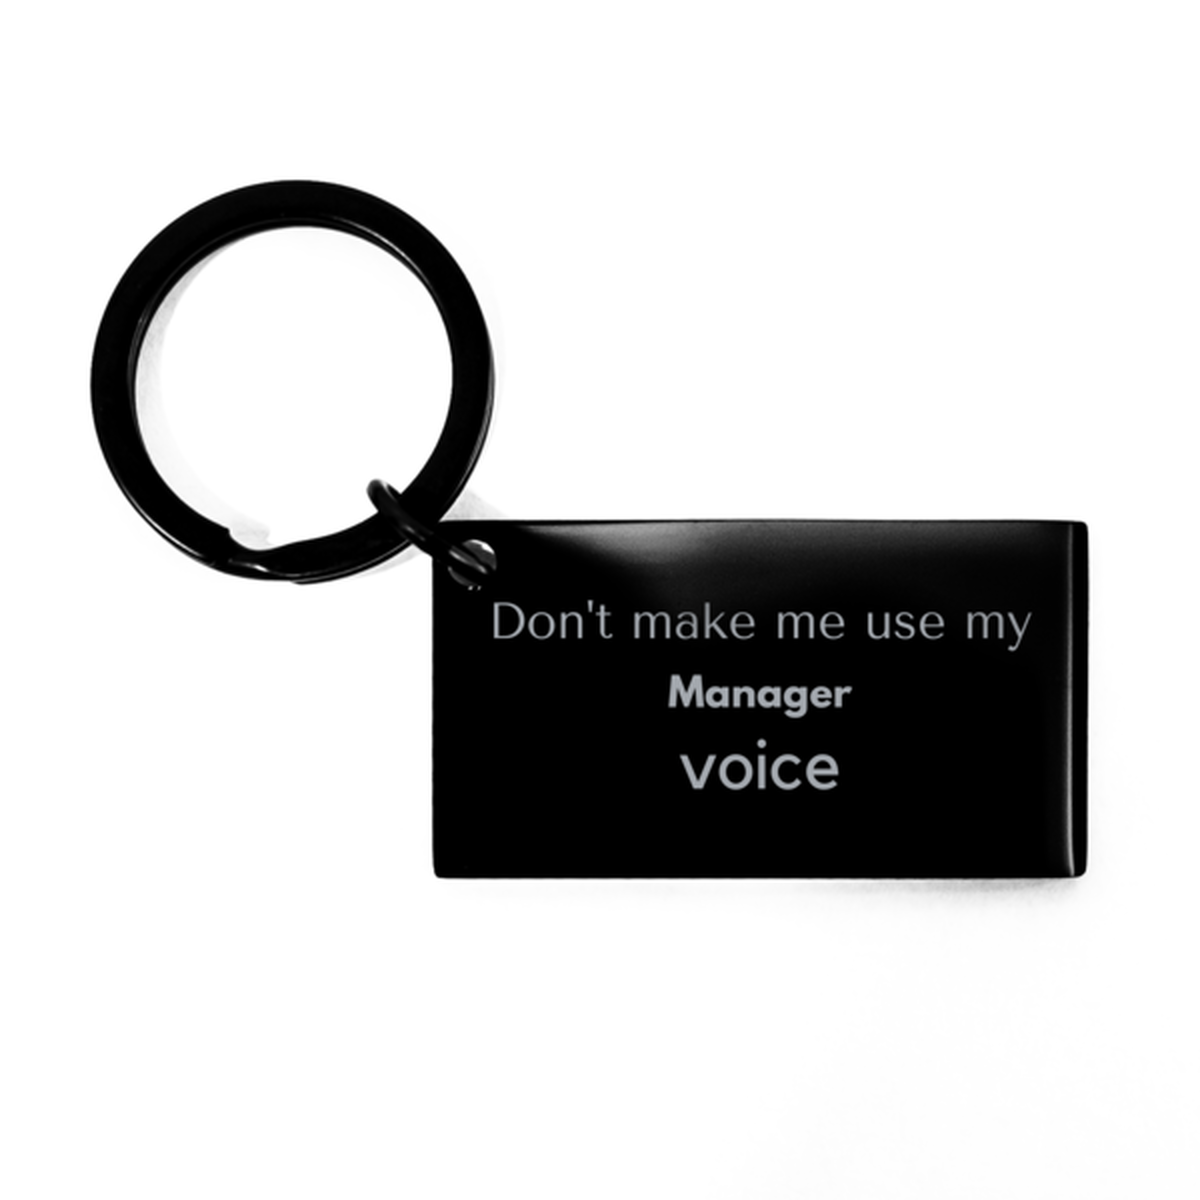 Don't make me use my Manager voice, Sarcasm Manager Gifts, Christmas Manager Keychain Birthday Unique Gifts For Manager Coworkers, Men, Women, Colleague, Friends